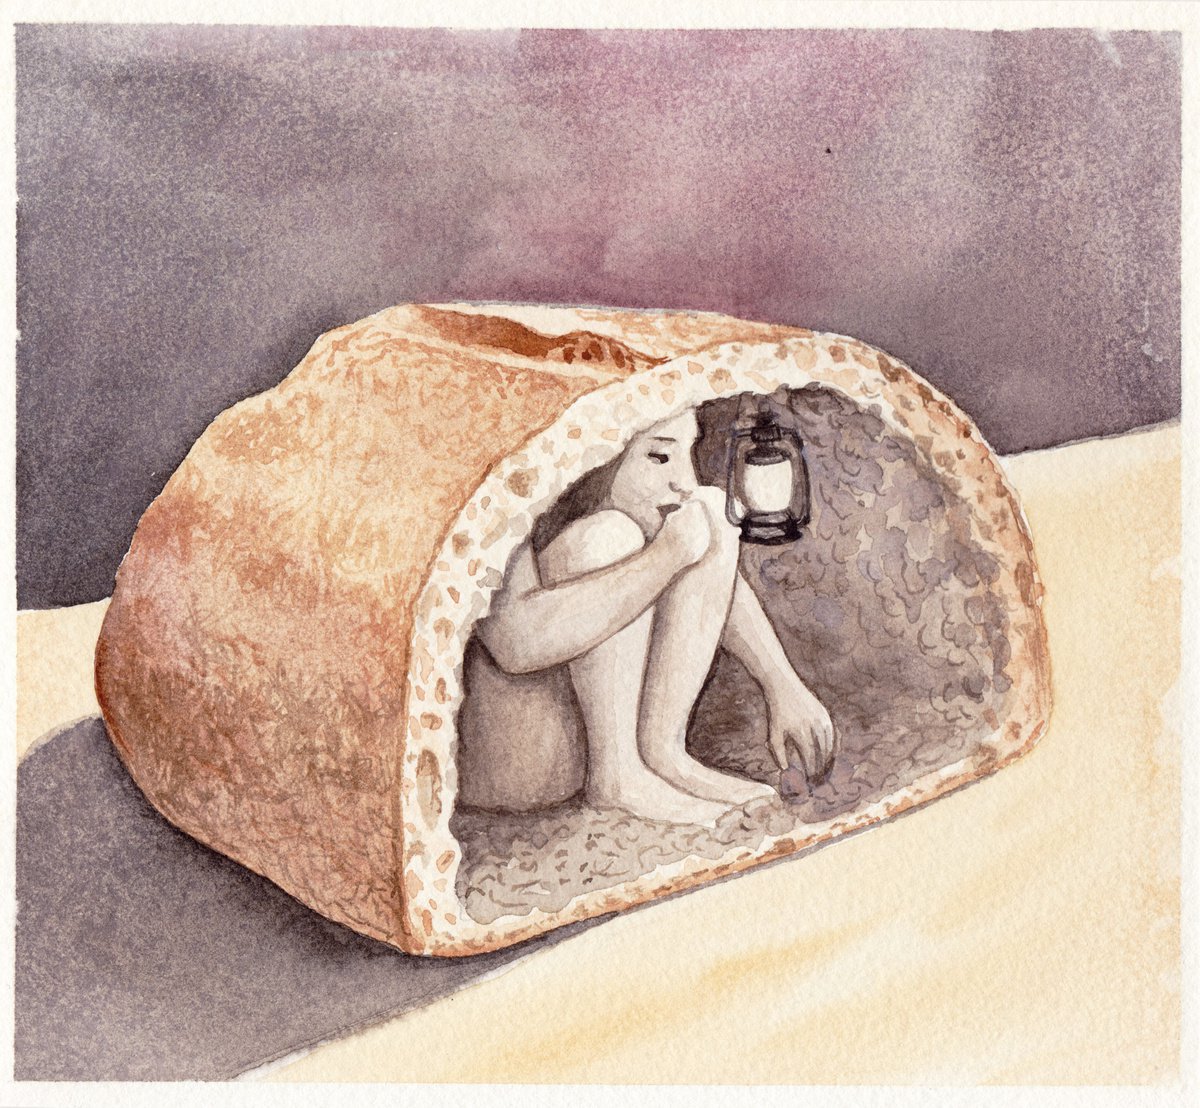 Bread-cave by Andromachi Giannopoulou